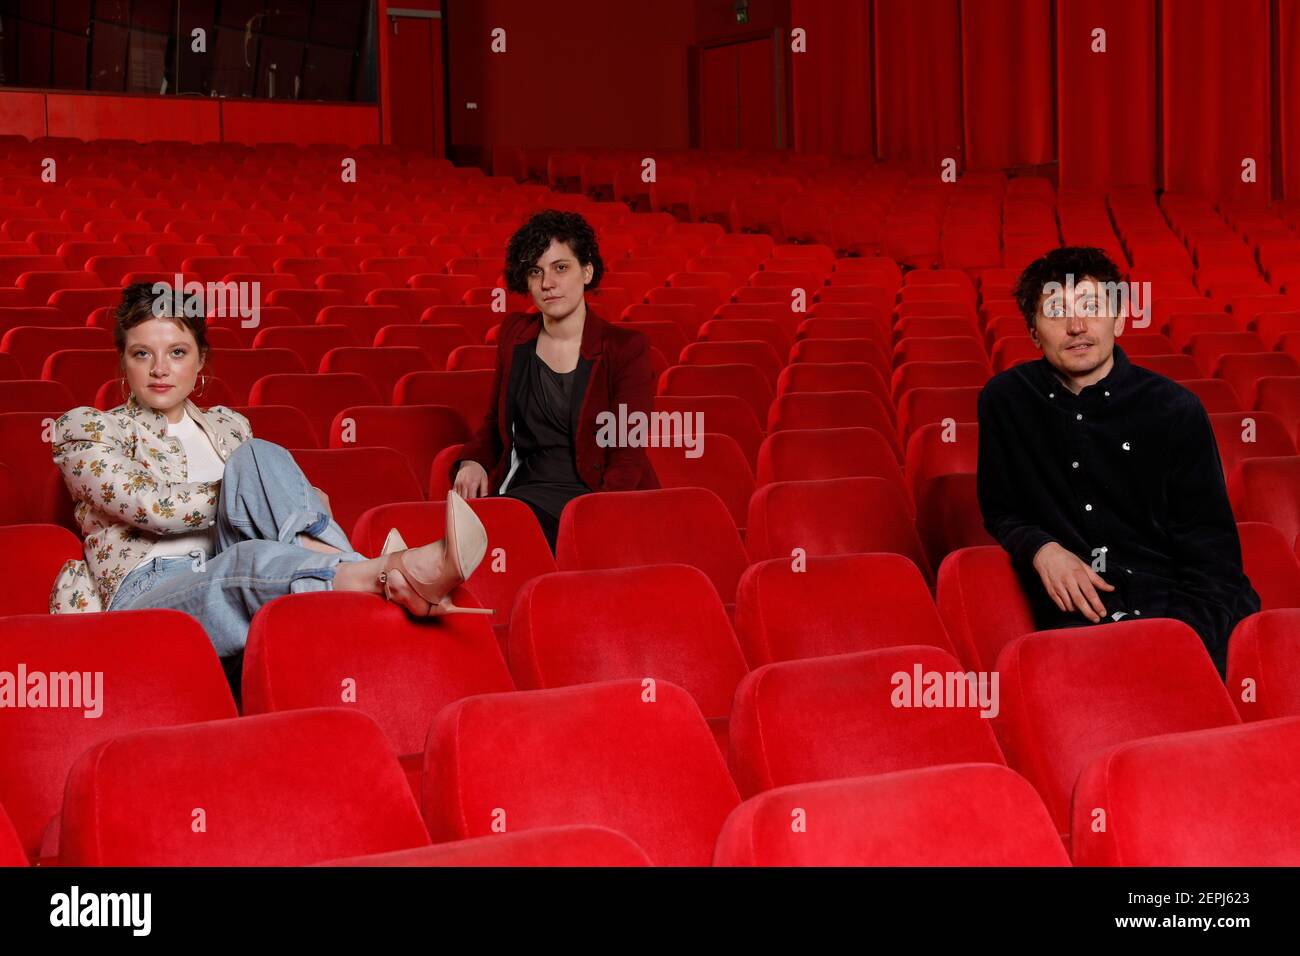 Berlin, Germany. 27th Feb, 2021. Jella Haase (l-r), Melanie Waelde and Mees Peijnenburg, the jury members of the Generation section of the 71st International Film Festival, show off in the empty cinema hall of the Berlinale Palast. The three-member jury will decide on the Grand Prize for Best Film in Competition Kplus (endowed with 7,500 euros, donated by the German Children's Fund) and the Grand Prize for Best Film in Competition 14plus (also endowed with 7,500 euros). The awards will be announced at the Industry Event on 5 March 2021. Credit: Markus Schreiber/AP POOL/dpa/Alamy Live News Stock Photo